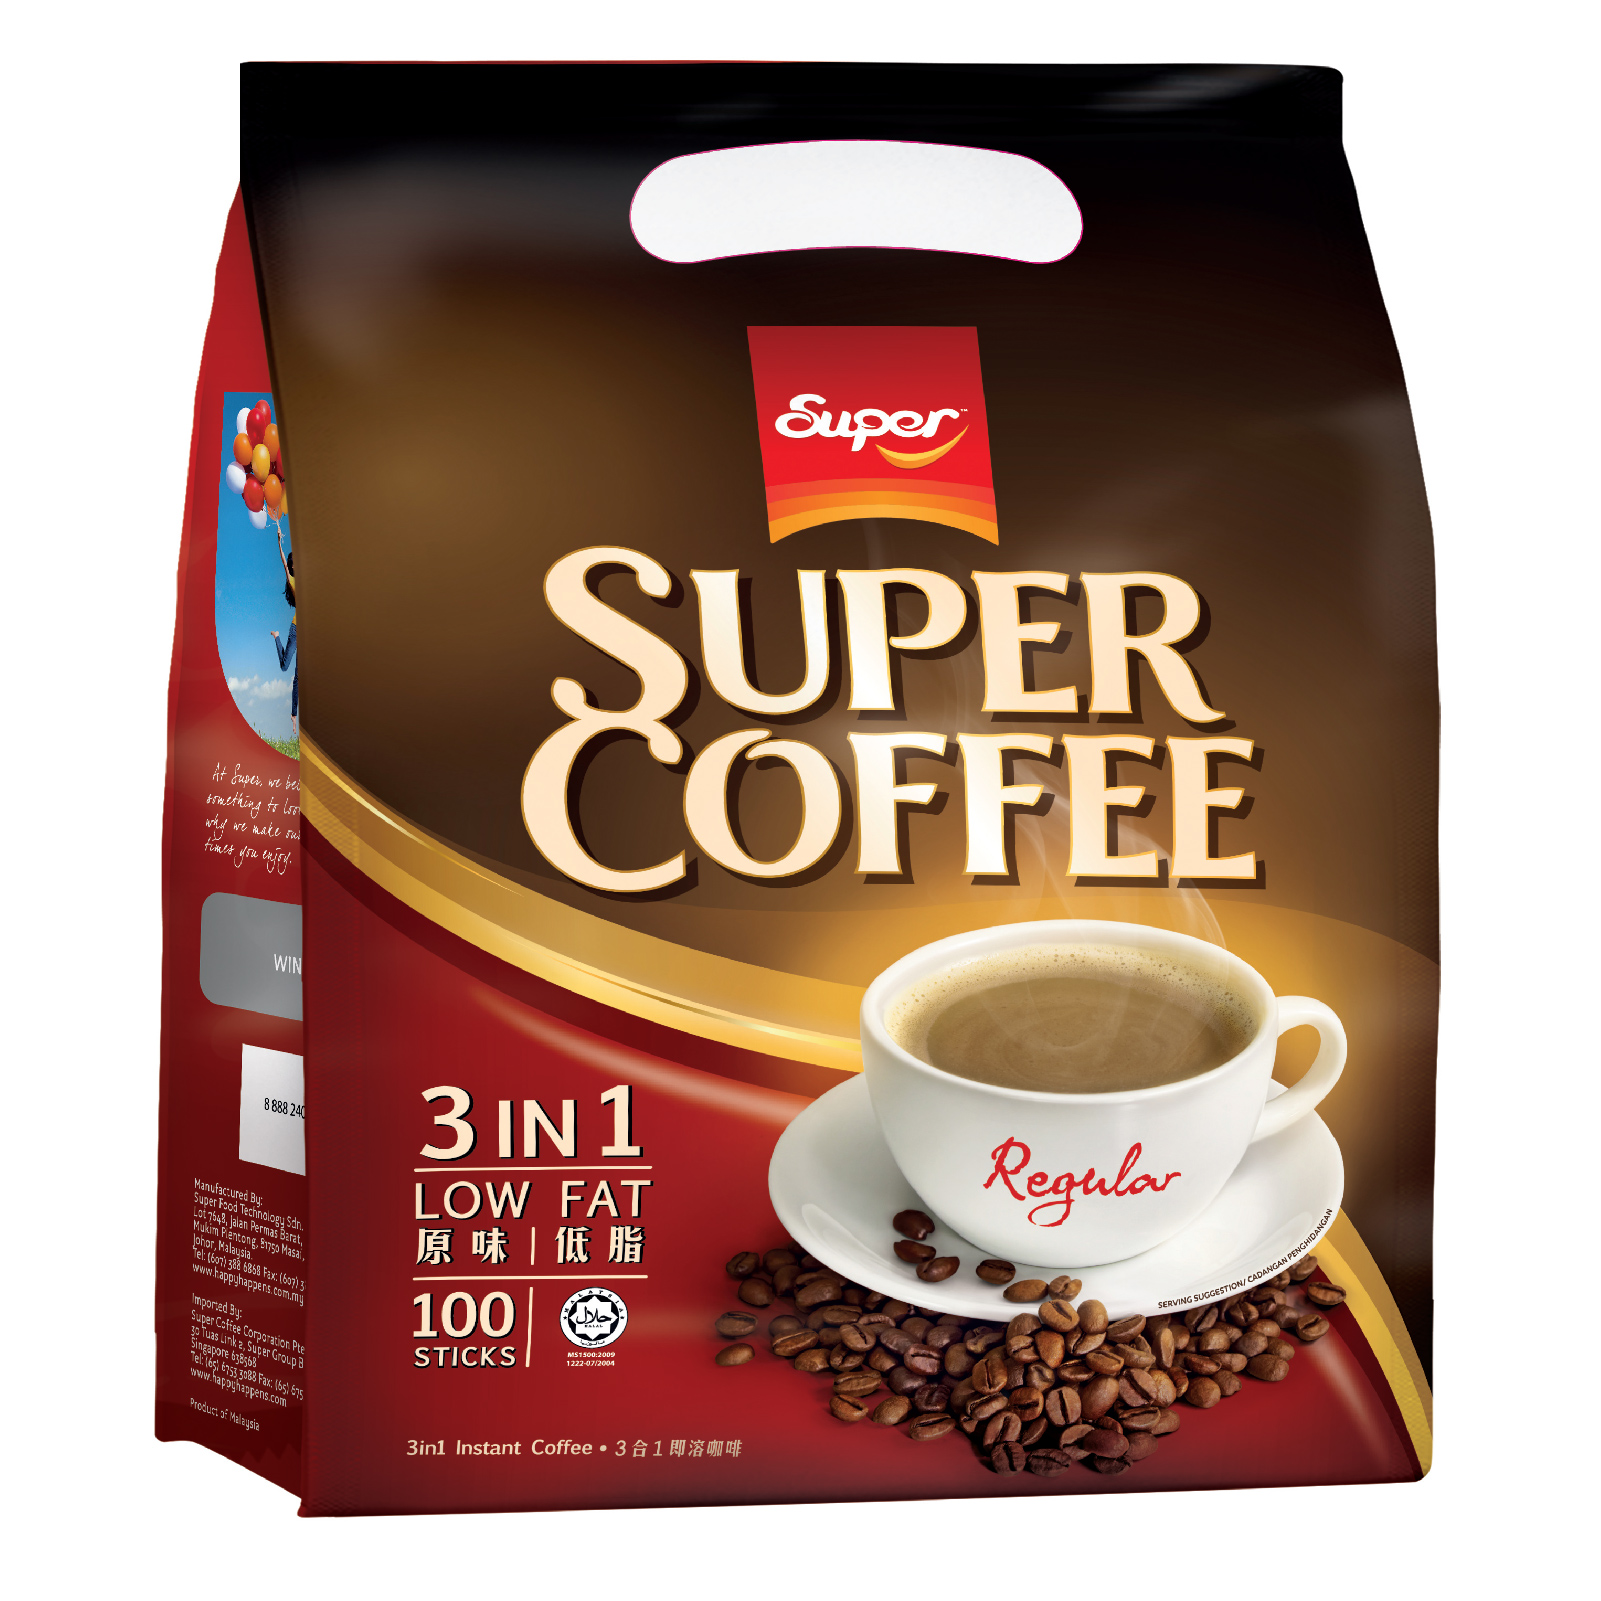 Instant Coffee 3-In-1 Low Fat (Regular) 100sX20g